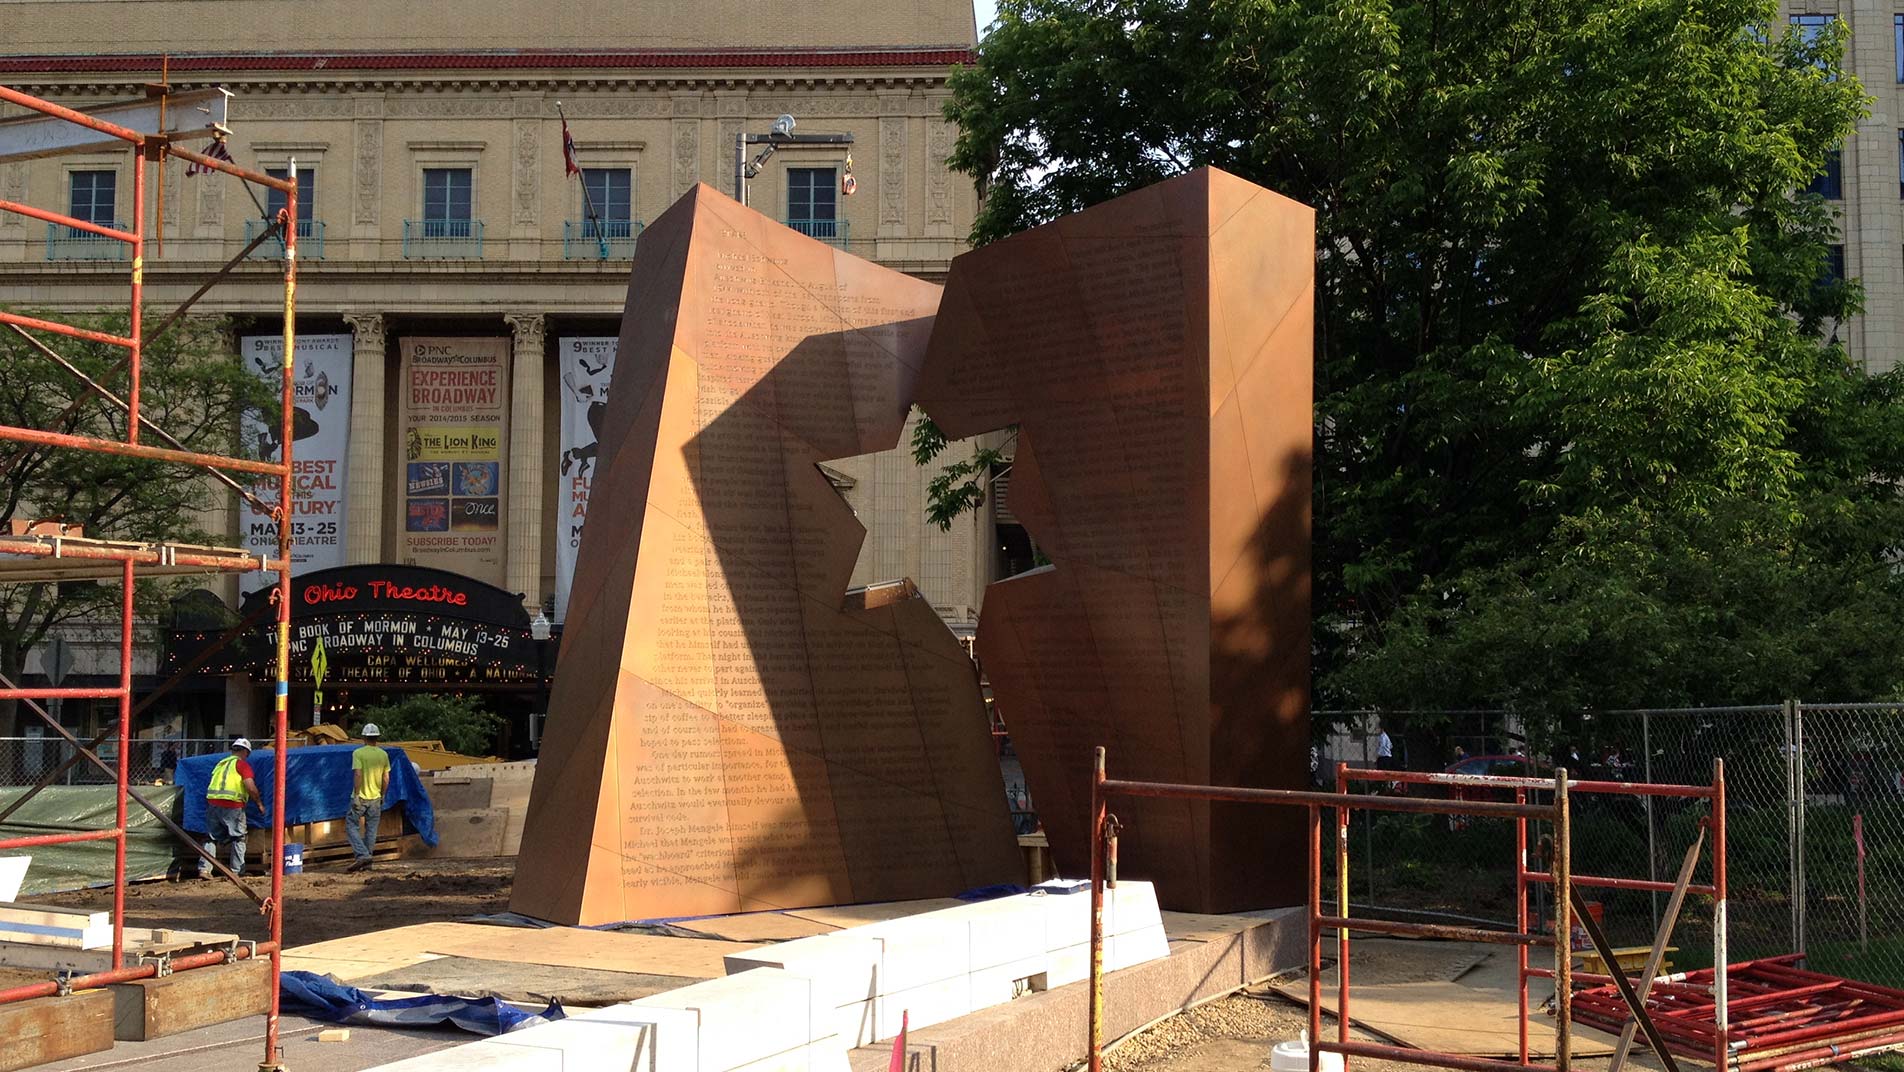 The memorial nears completion at the Ohio Statehouse